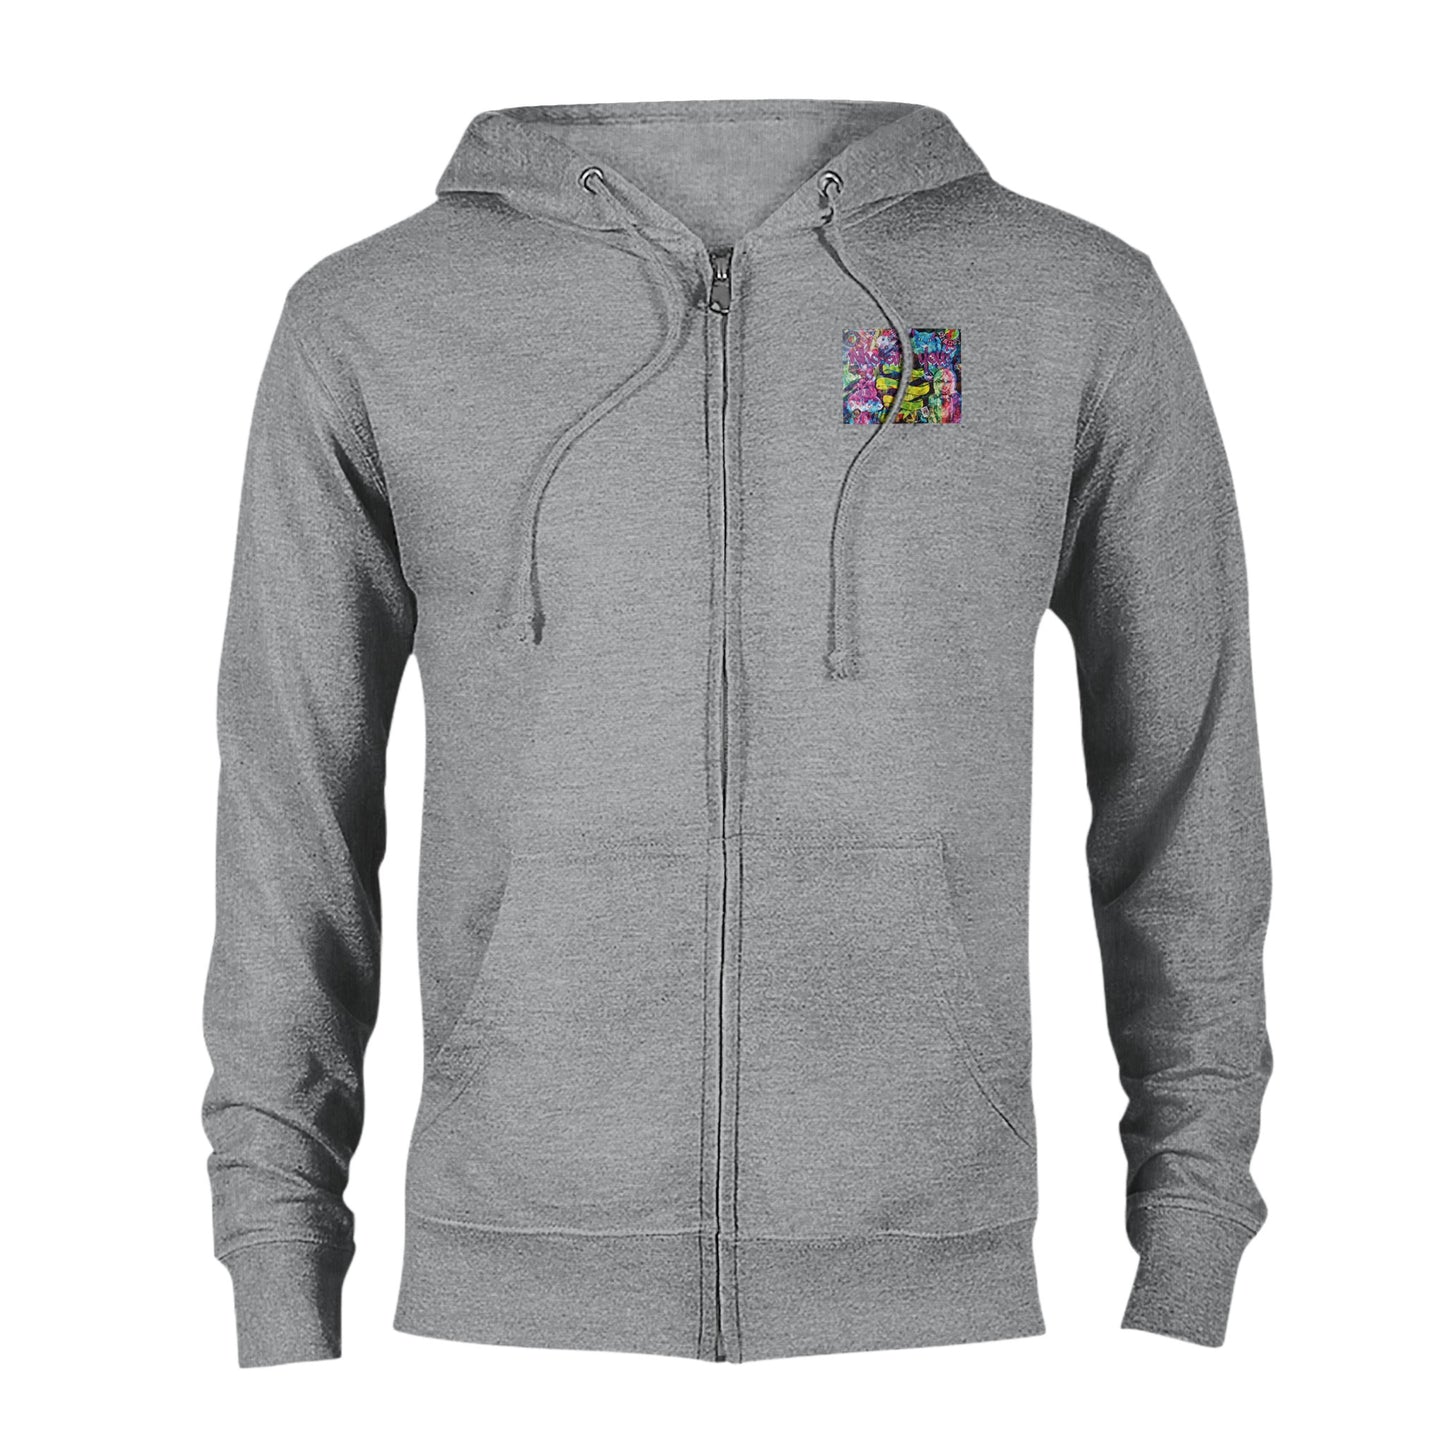 Who Are You? Zip Up Hoodie